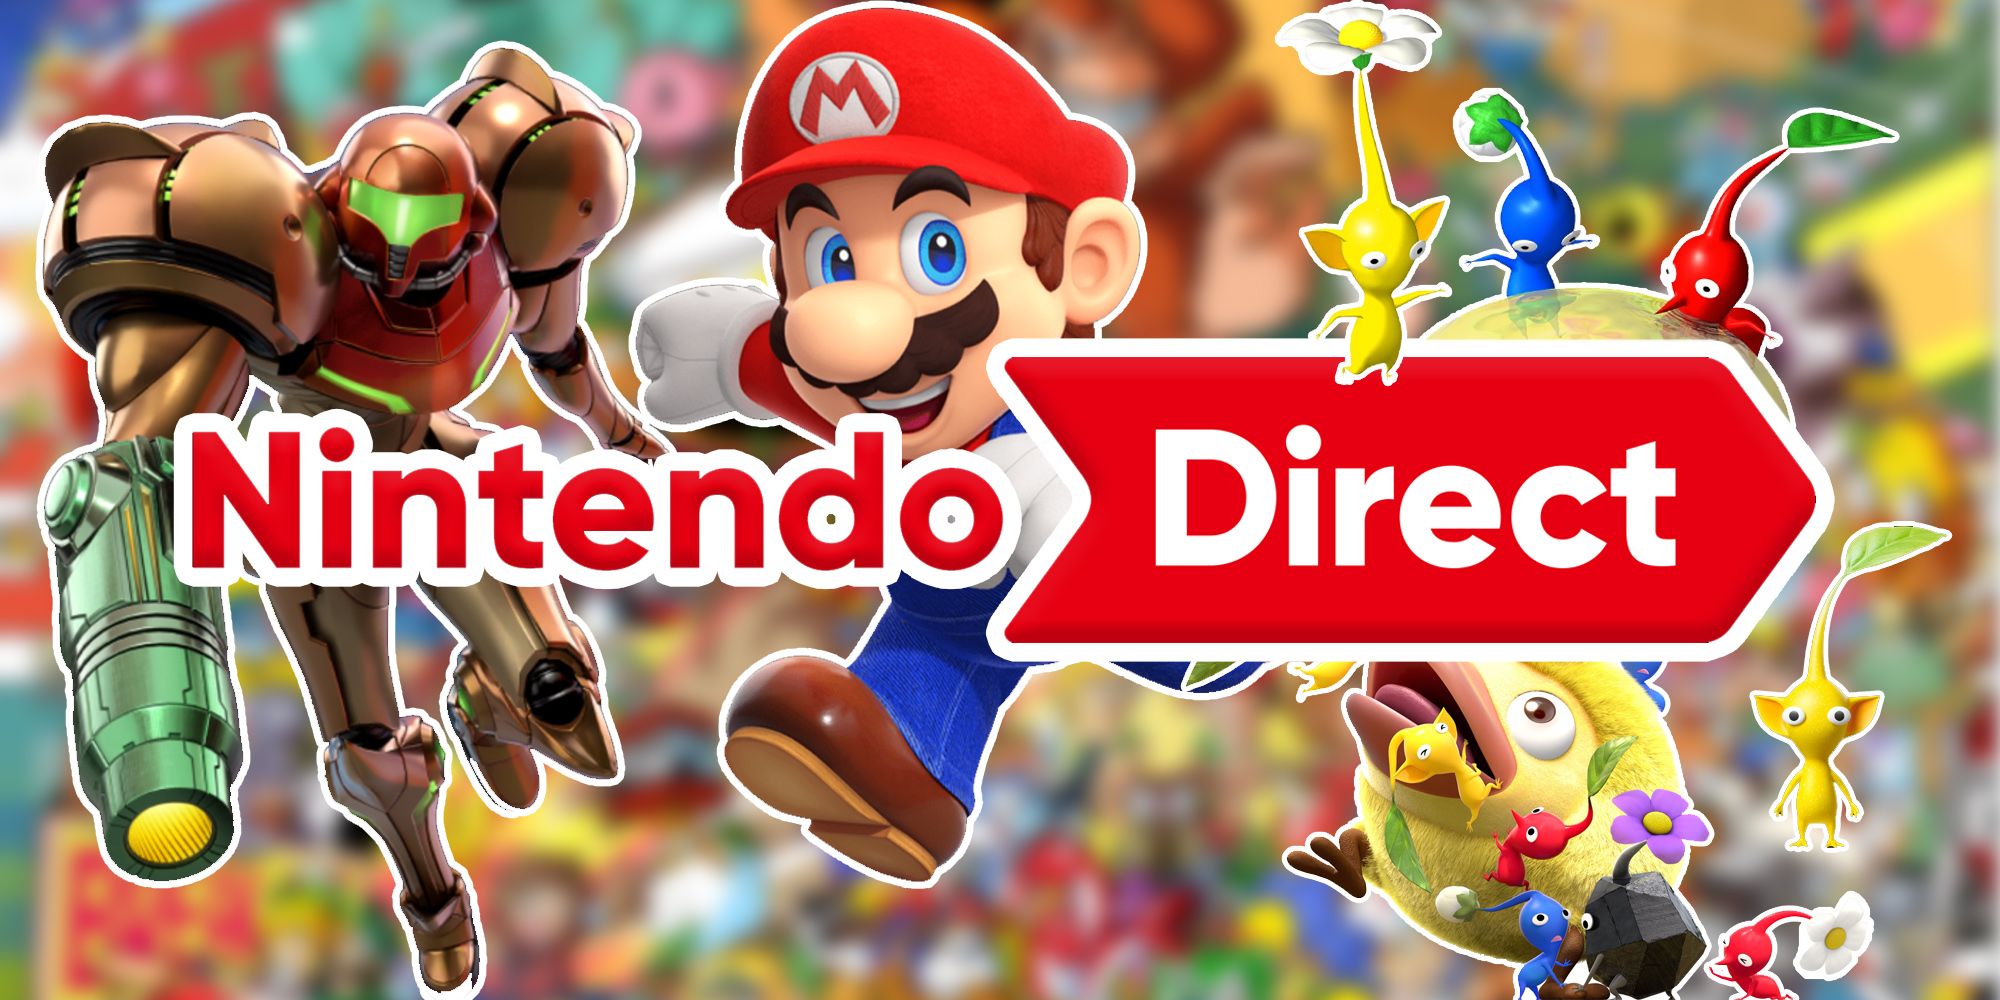 Nintendo Direct Confirmed for Tomorrow, June 21st - Insider Gaming